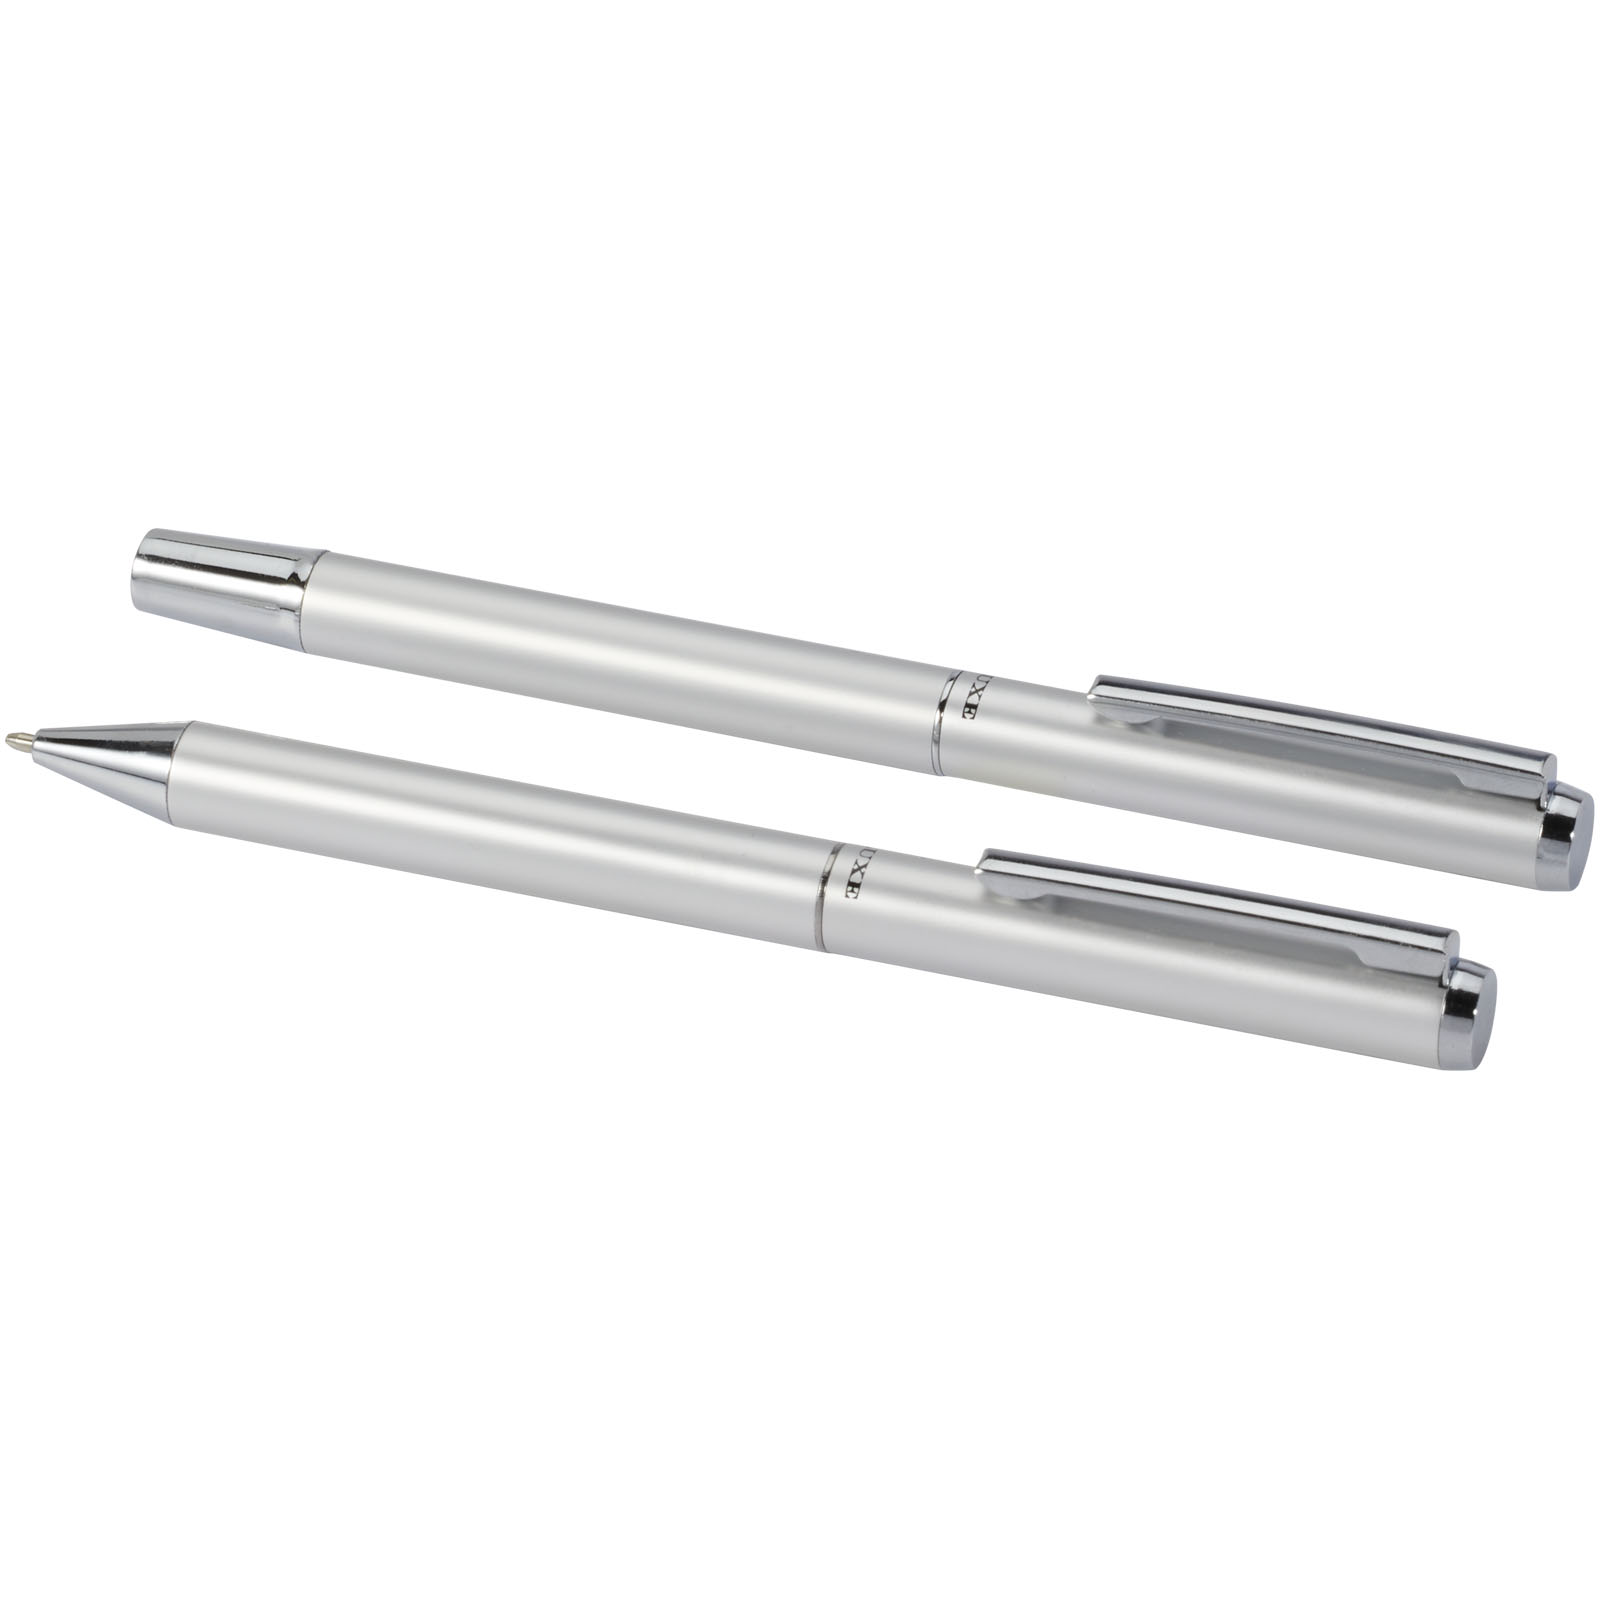 Advertising Gift sets - Lucetto recycled aluminium ballpoint and rollerball pen gift set - 4